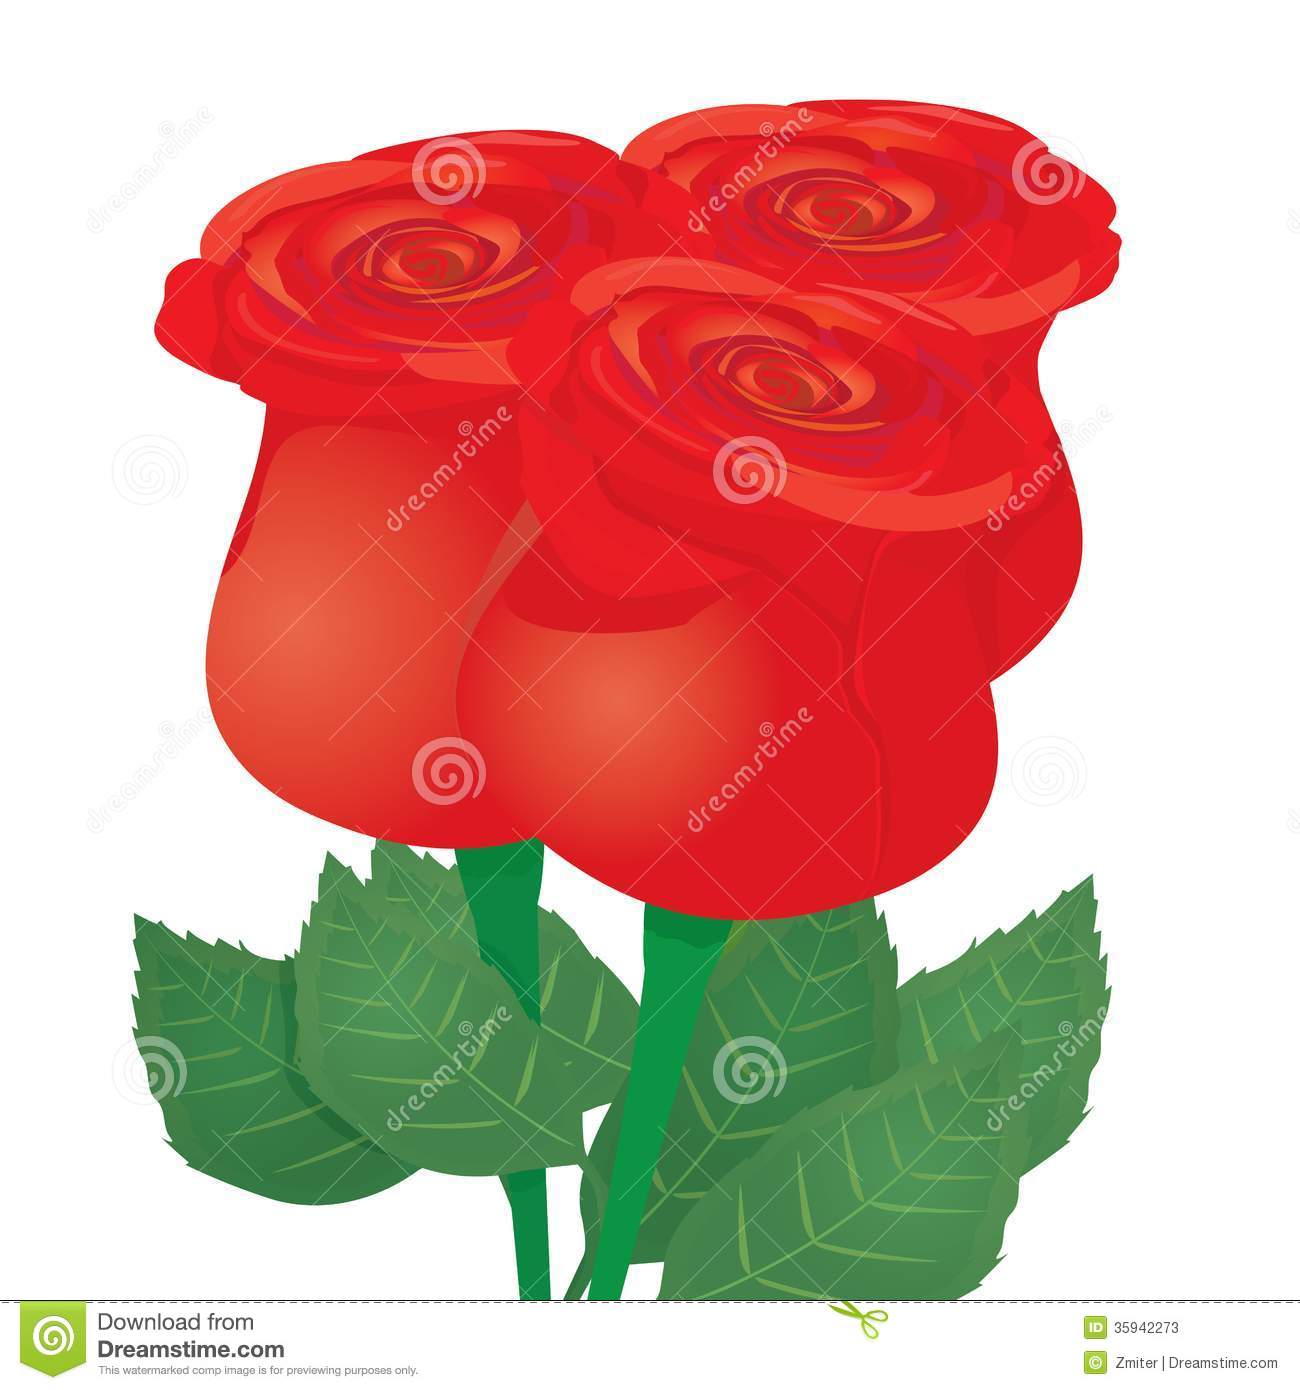 Greetings with Red Rose Flower